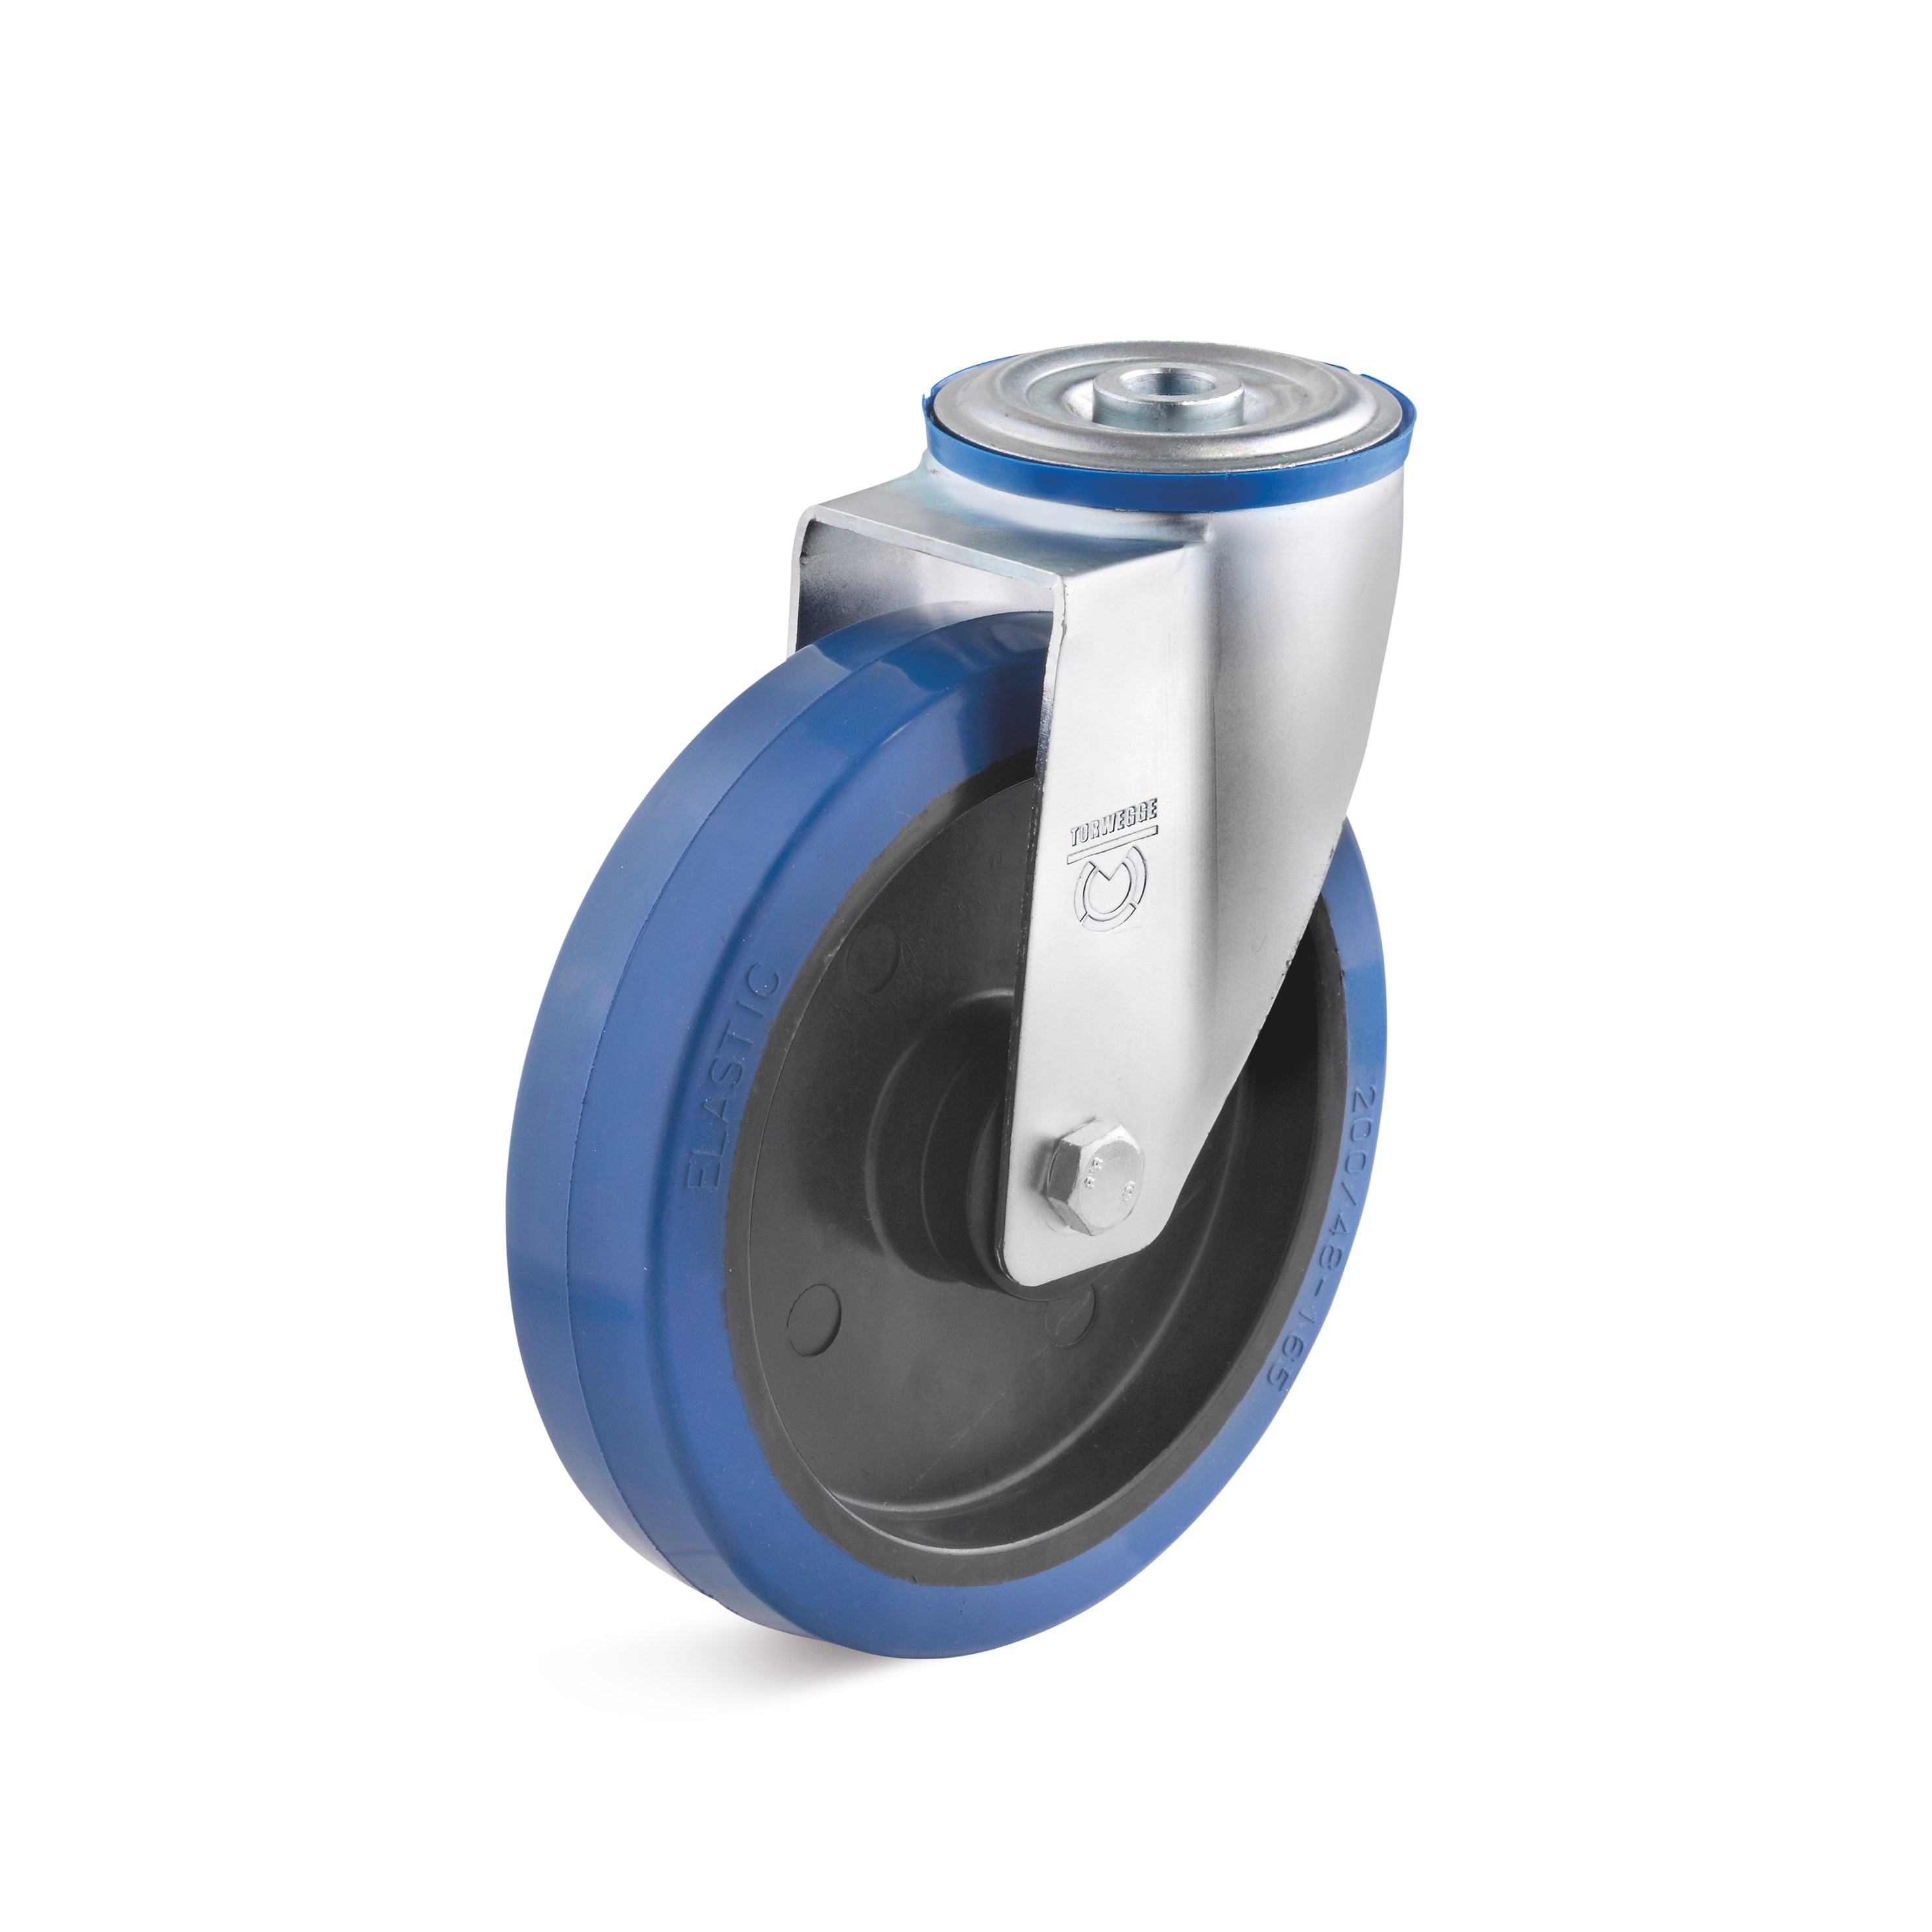 Swivel castor with back hole and elastic solid rubber wheel